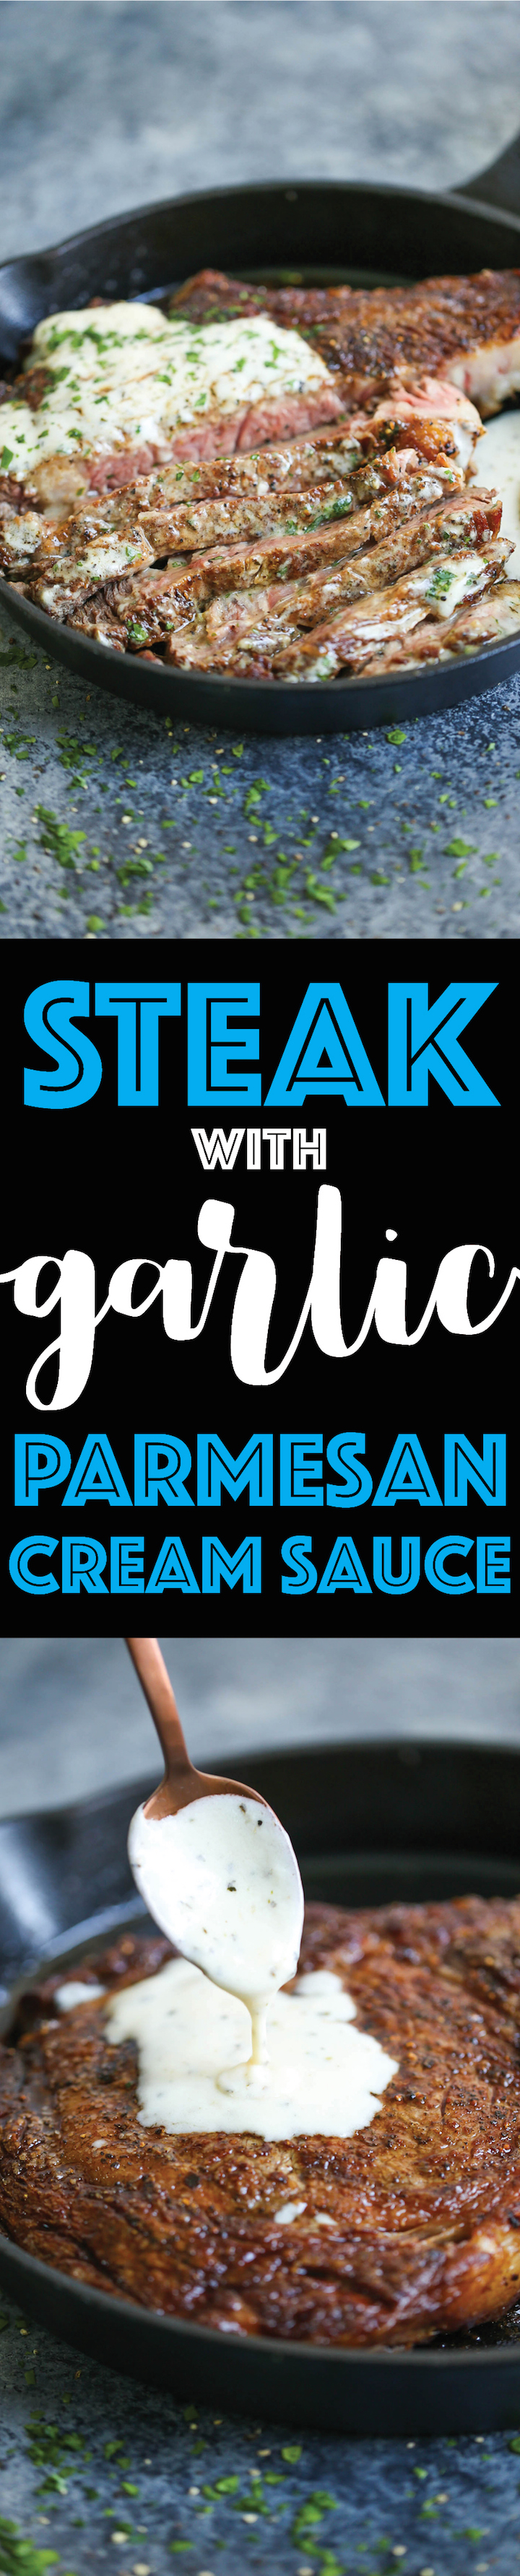 Steak with Garlic Parmesan Cream Sauce - Perfectly tender, juicy steak is served with the most velvety cream sauce that just melts in your mouth! SO GOOD!!!